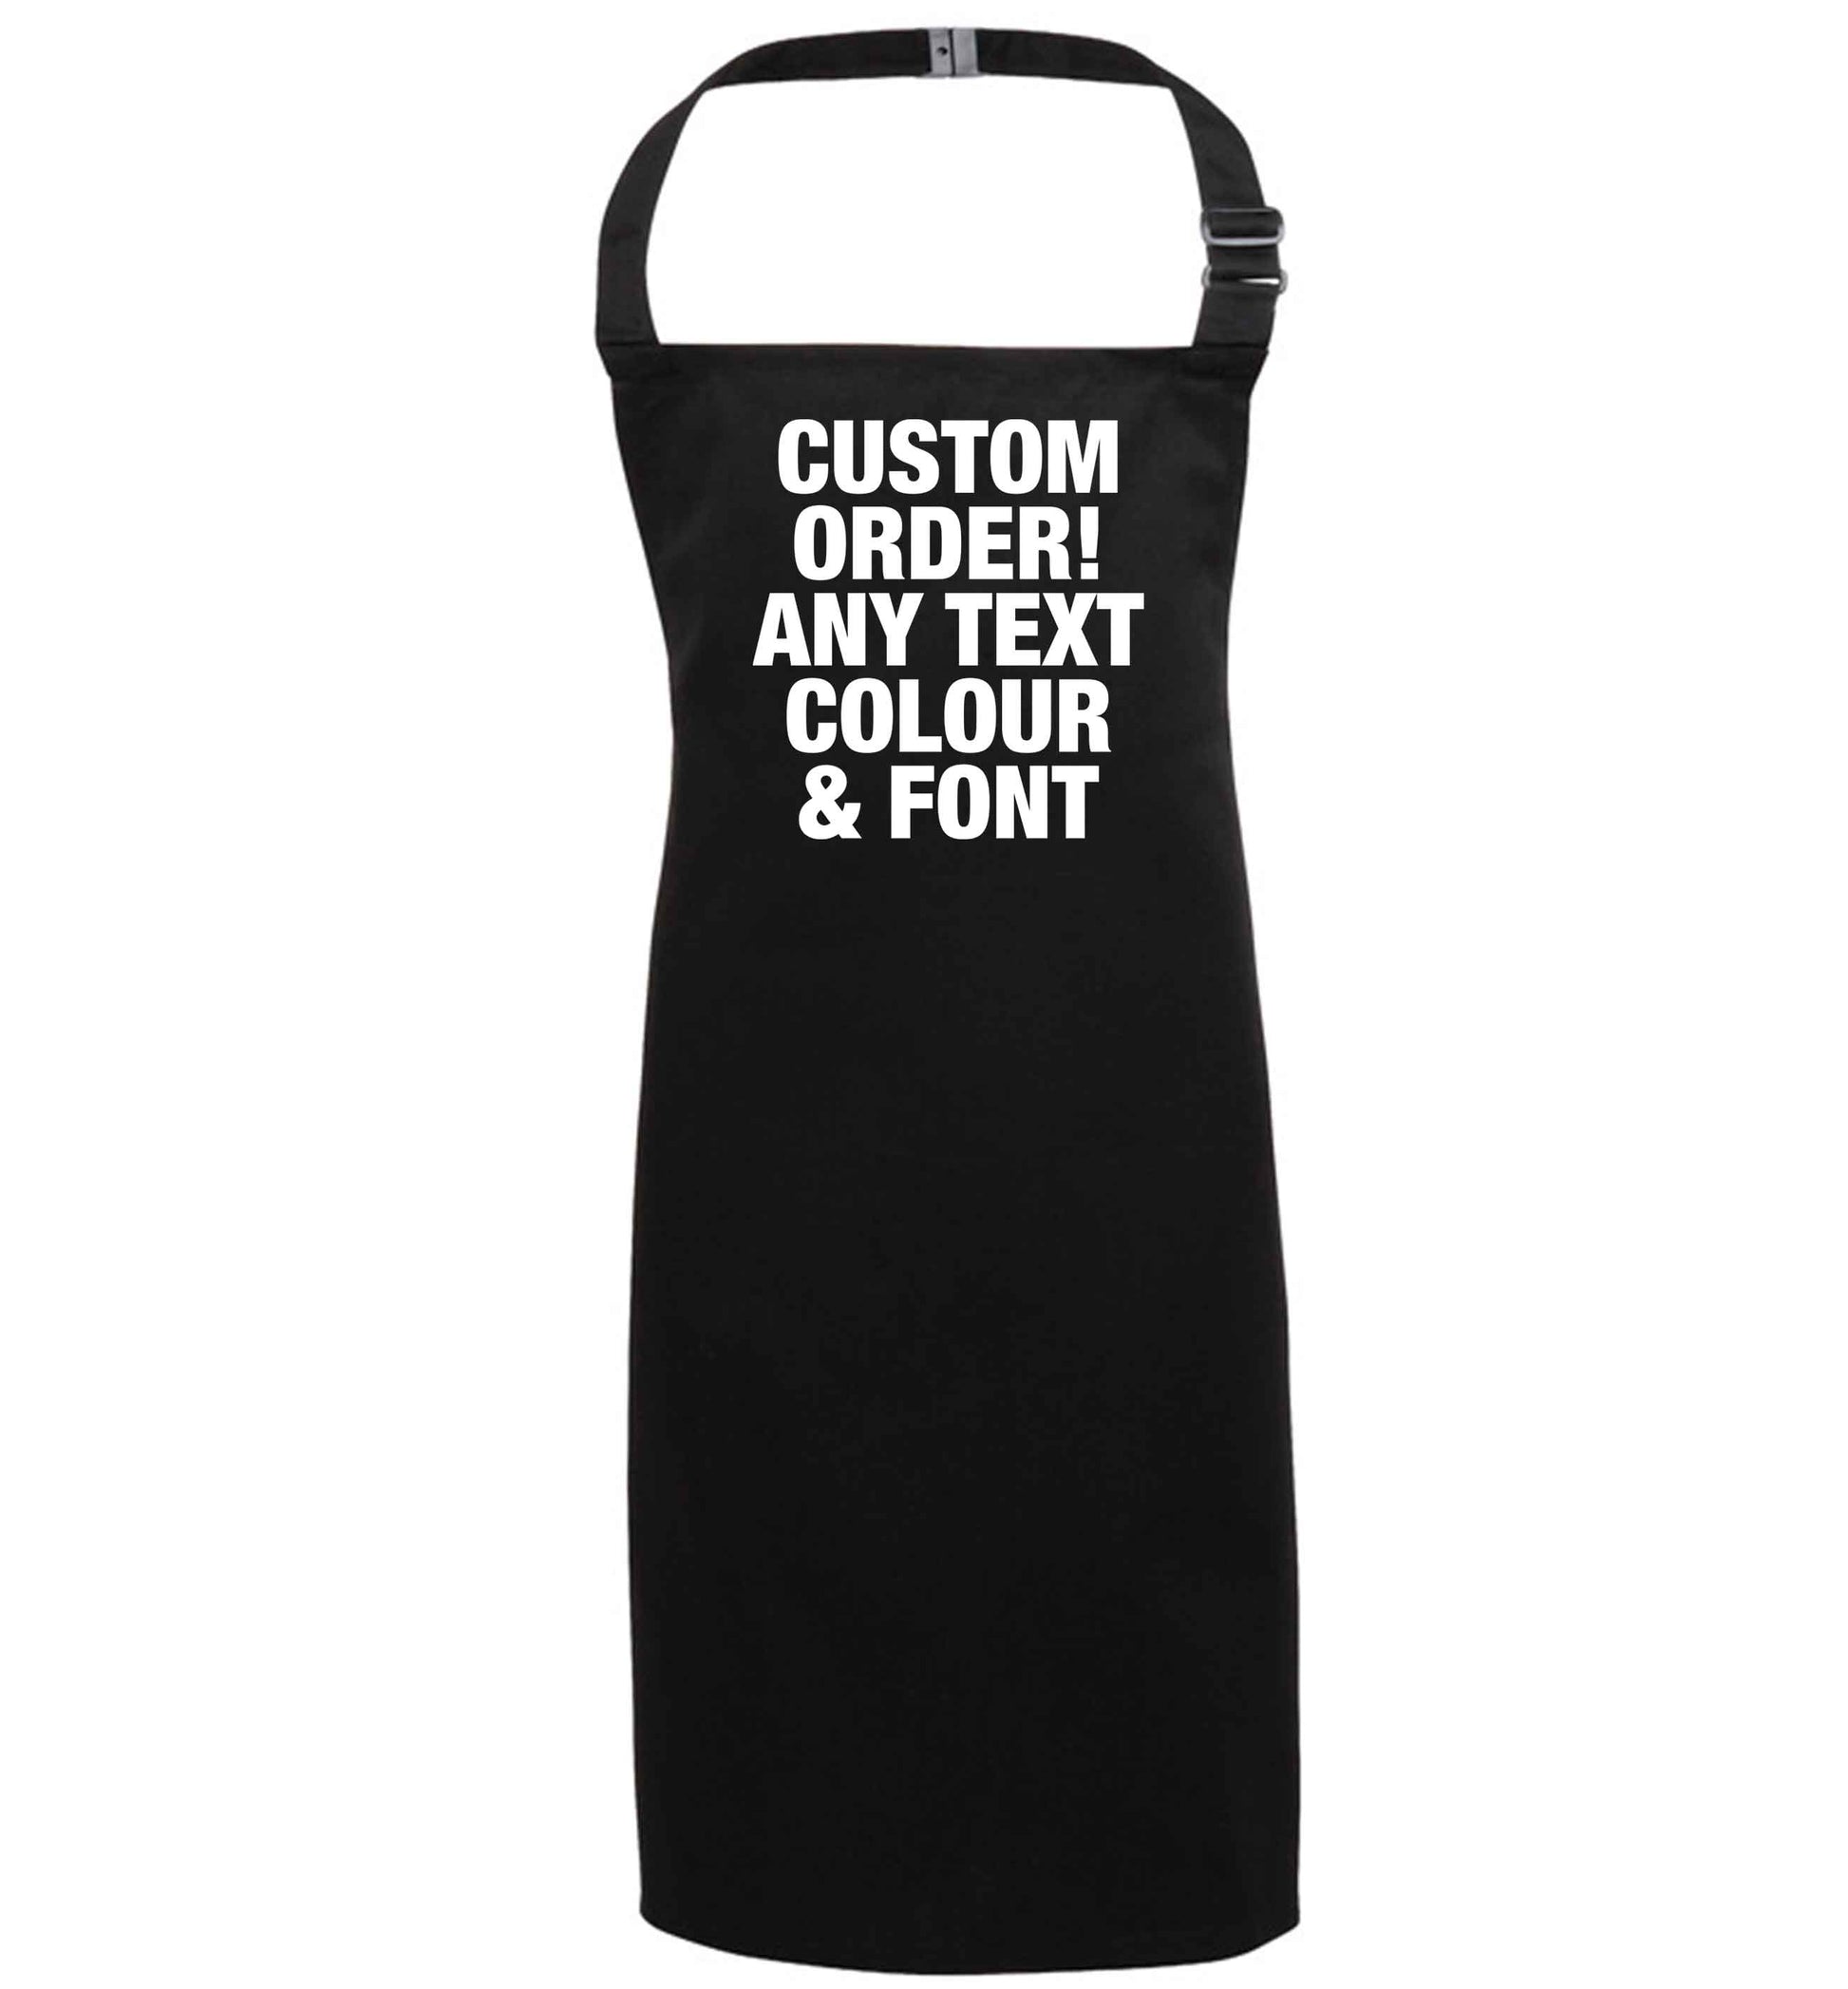 Custom order any text colour and font black apron 7-10 years